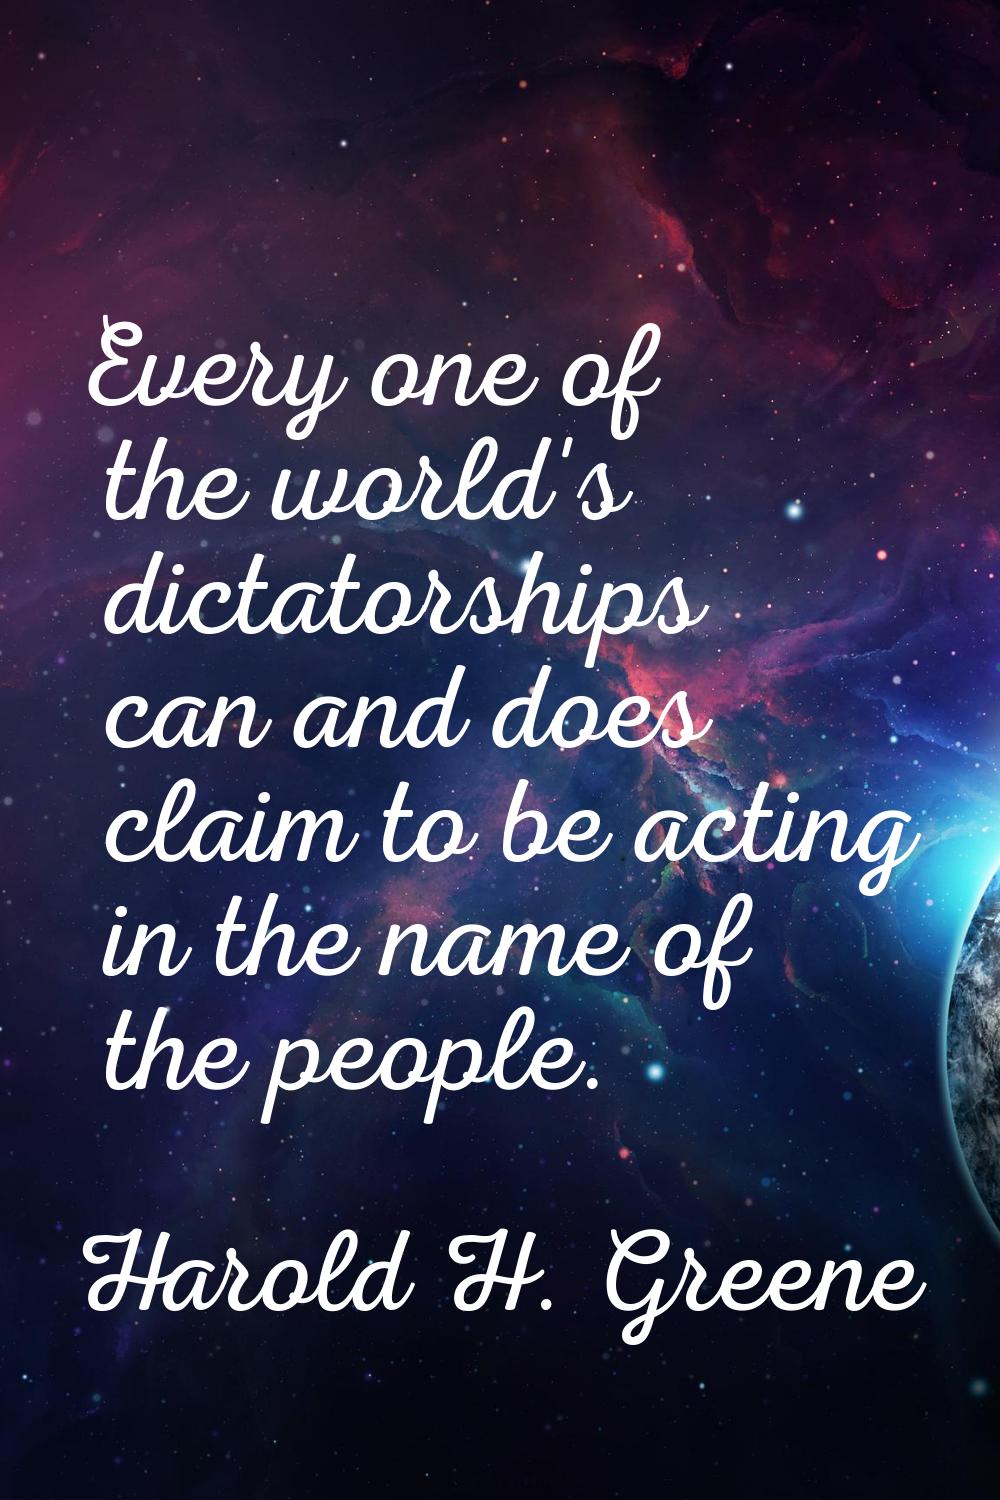 Every one of the world's dictatorships can and does claim to be acting in the name of the people.